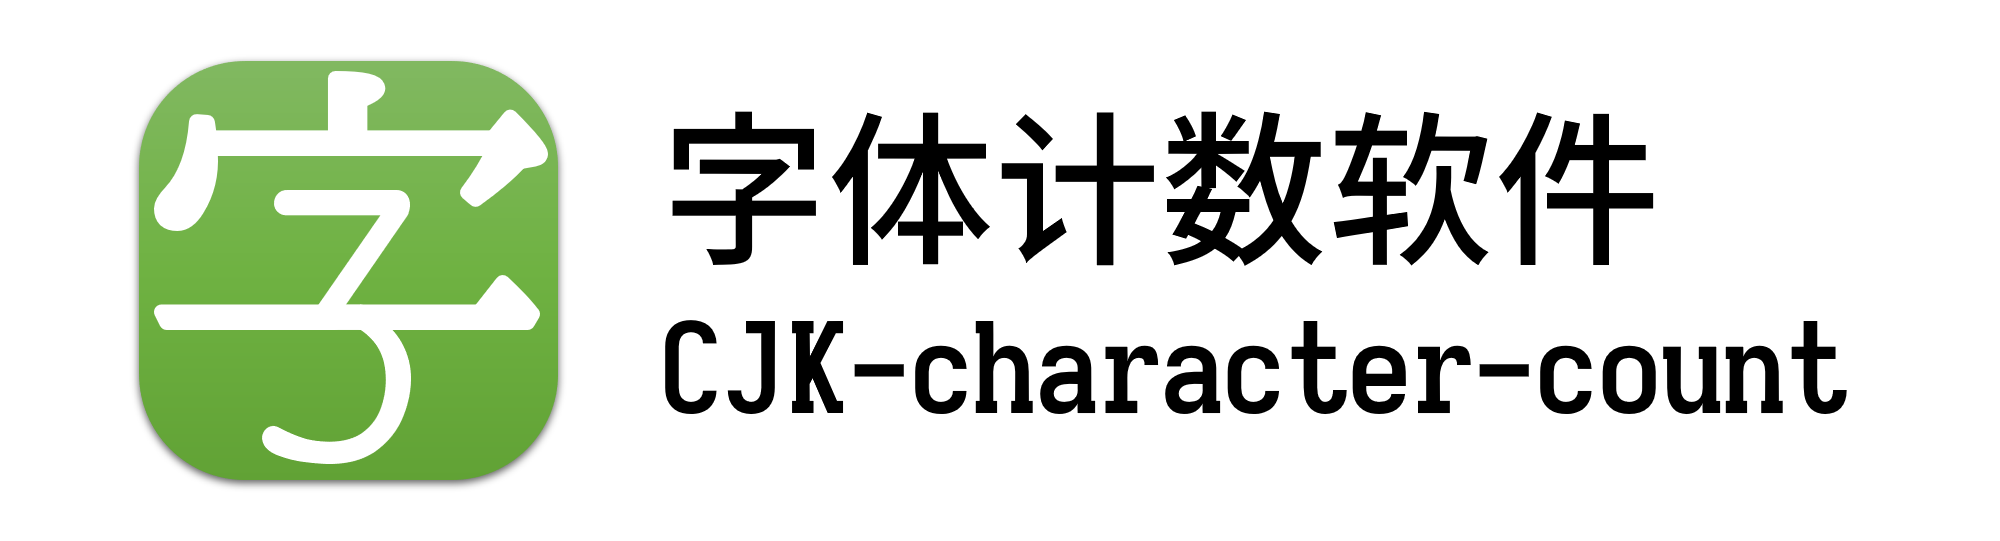 Banner of CJK-character-count